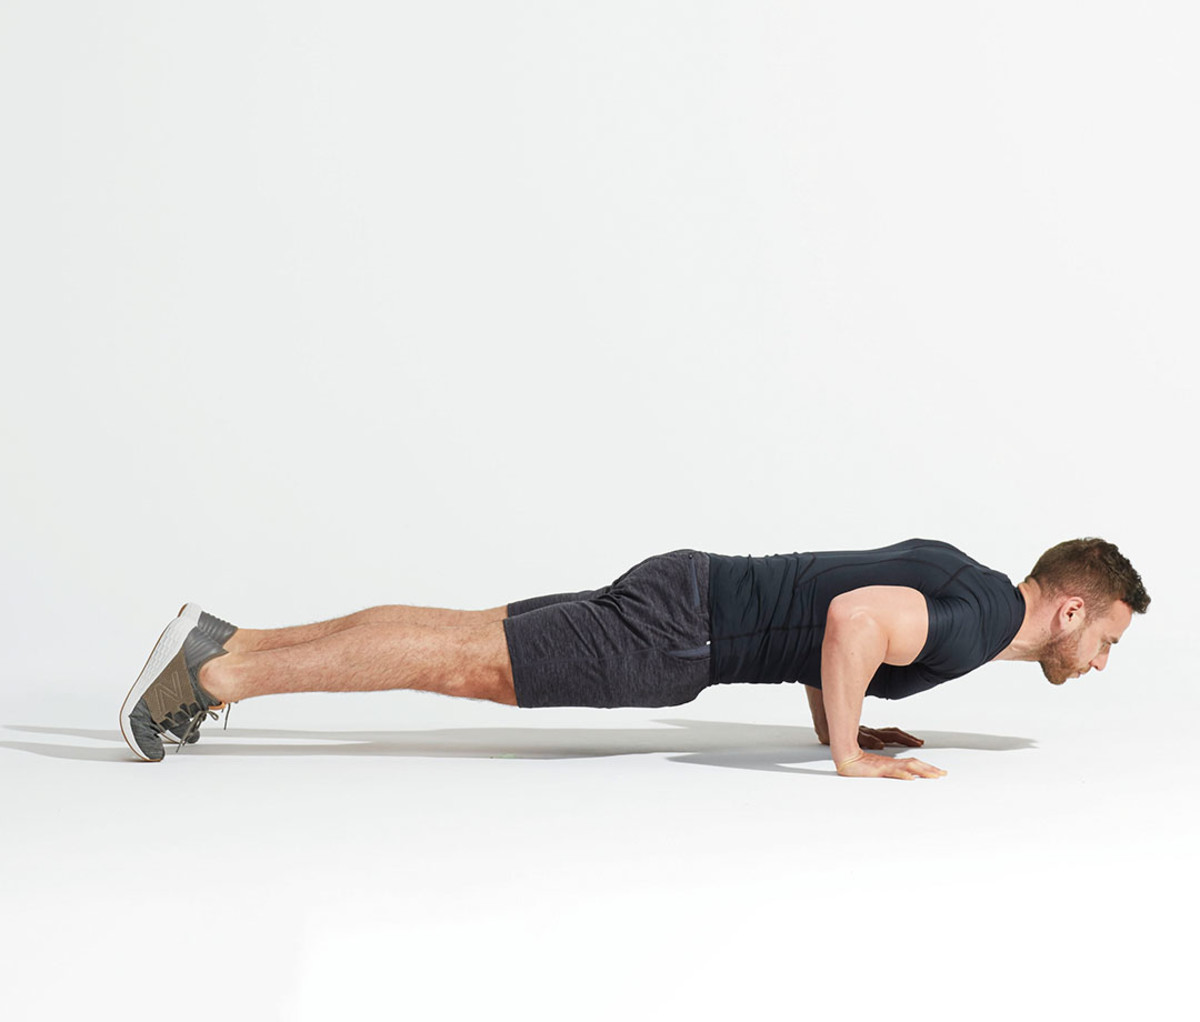 Planks vs push-ups, what's the differences, and which is better for  beginners? - Quora